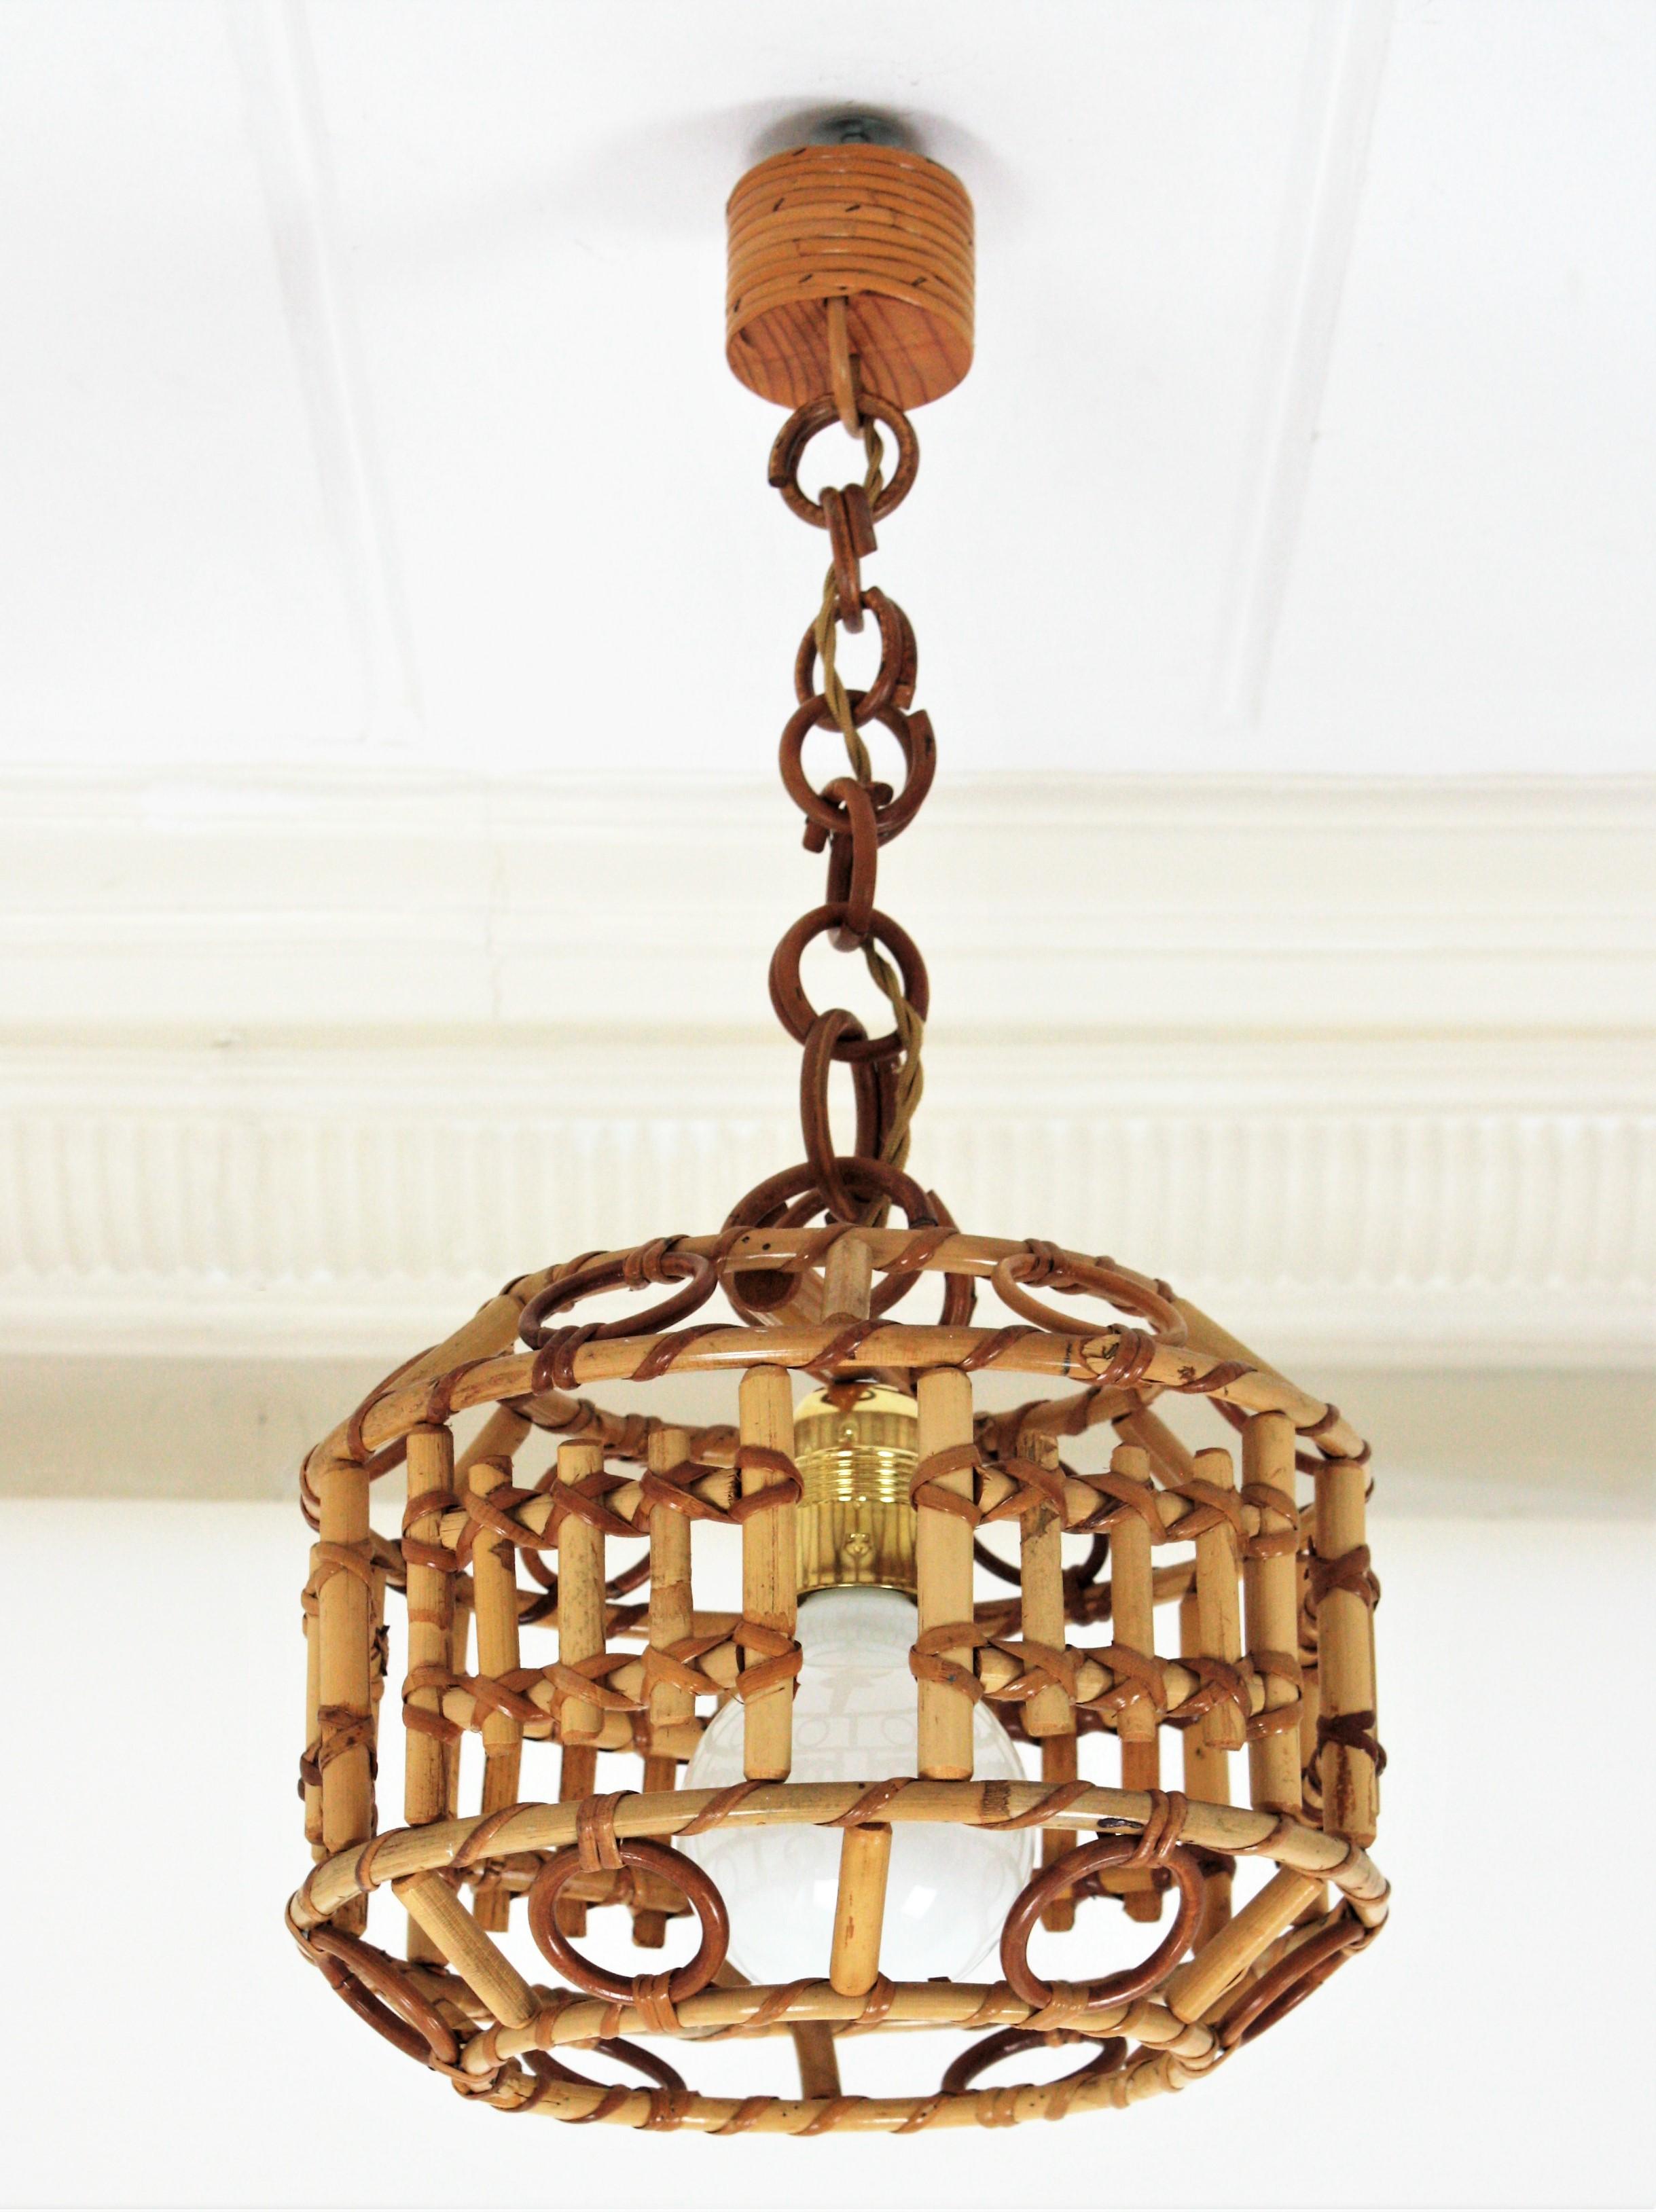 A beautiful handcrafted bamboo, rattan and wicker pendant light or lantern with geometric decorations, Spain, 1960s.
It hangs from a wicker chain that can be modified to make it shorter. The canopy is wrapped with wicker cane.
The geometric design